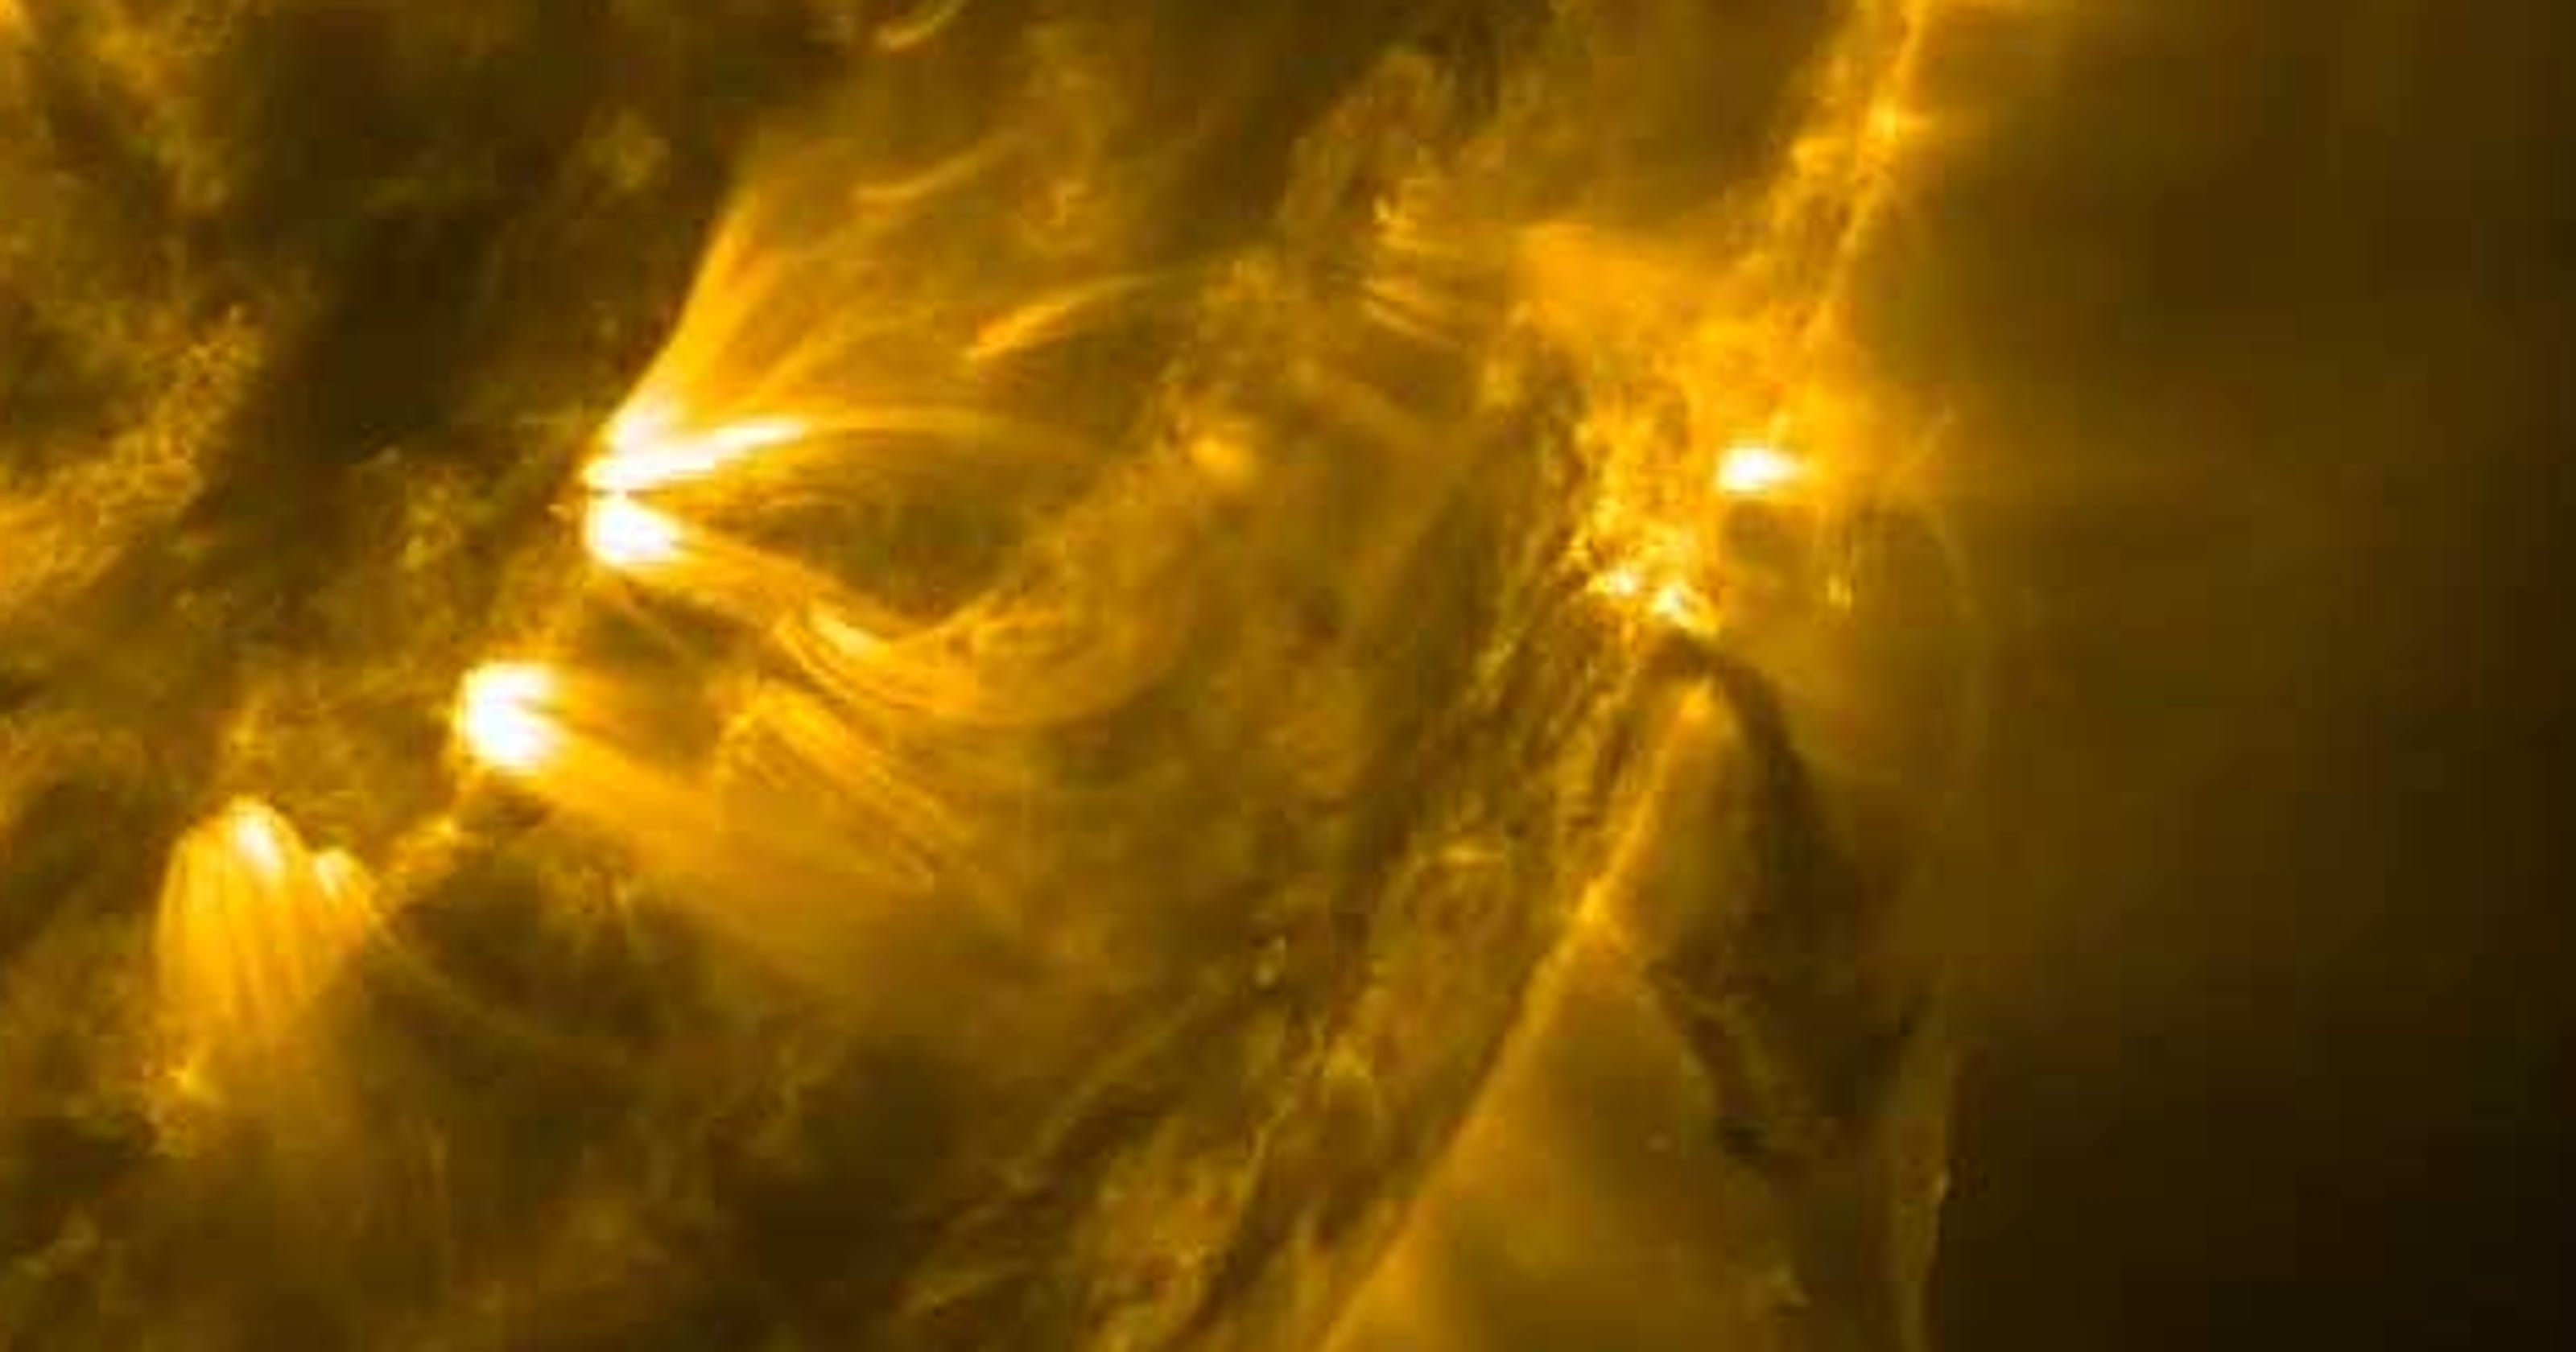 NASA captures huge explosion on the surface of the sun